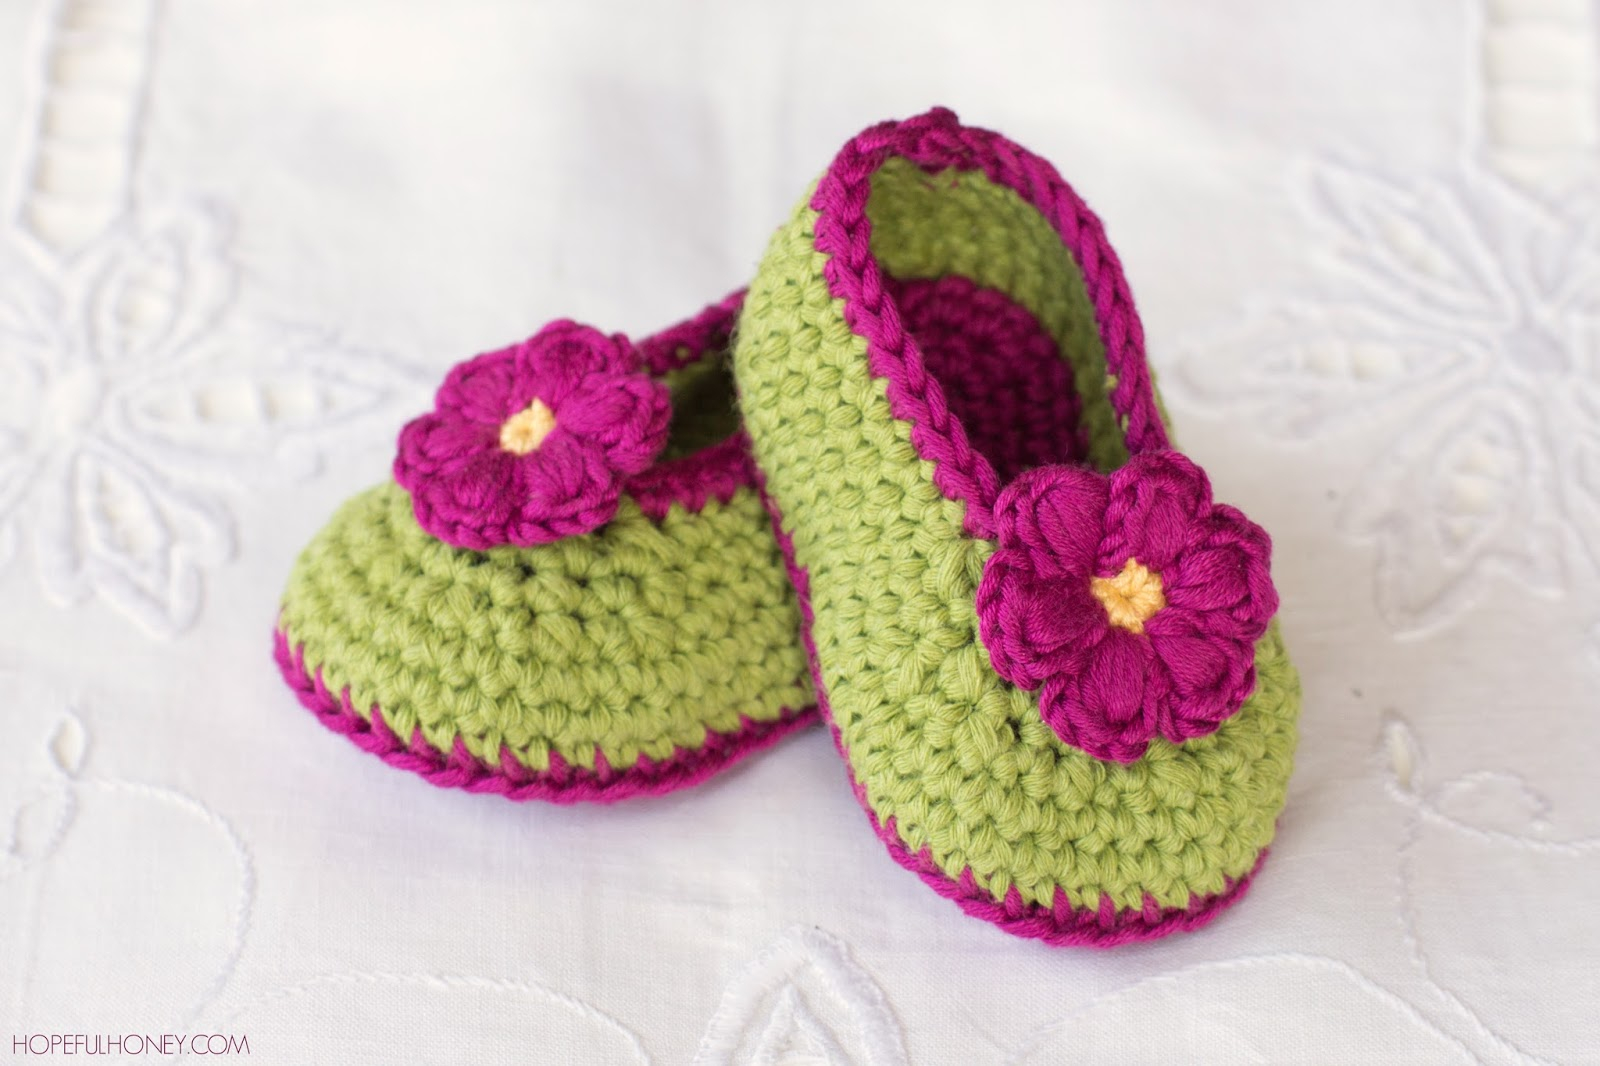 Crochet Pattern For Baby Booties Easy To Make Crochet Booties Crochet And Knitting Patterns 2019